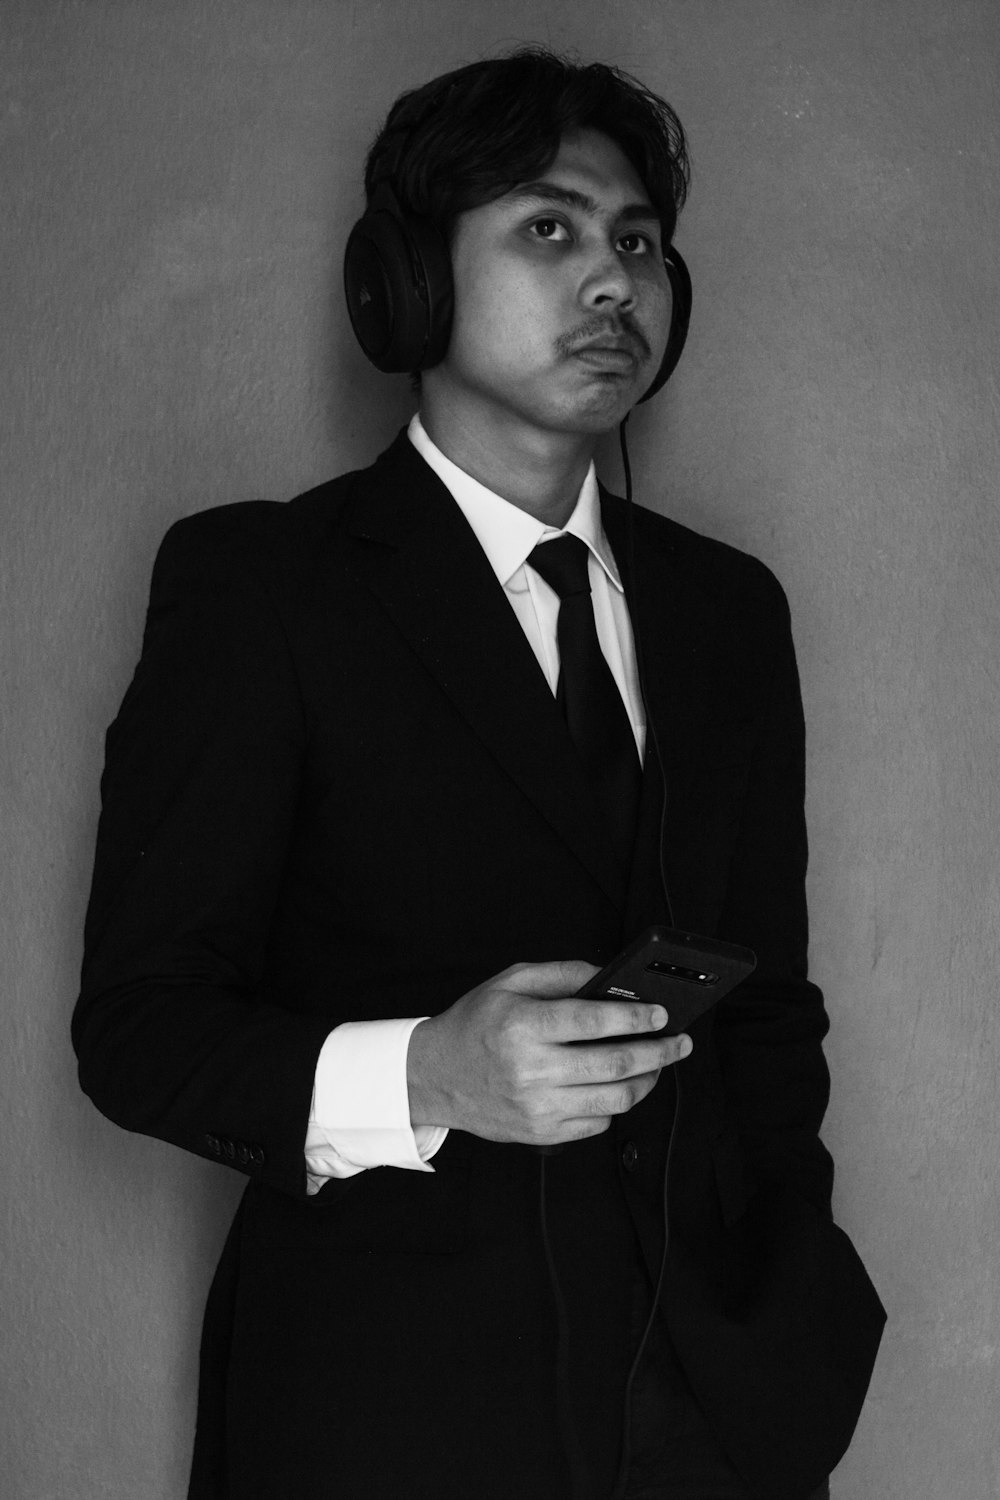 a person wearing a suit and headphones holding a phone